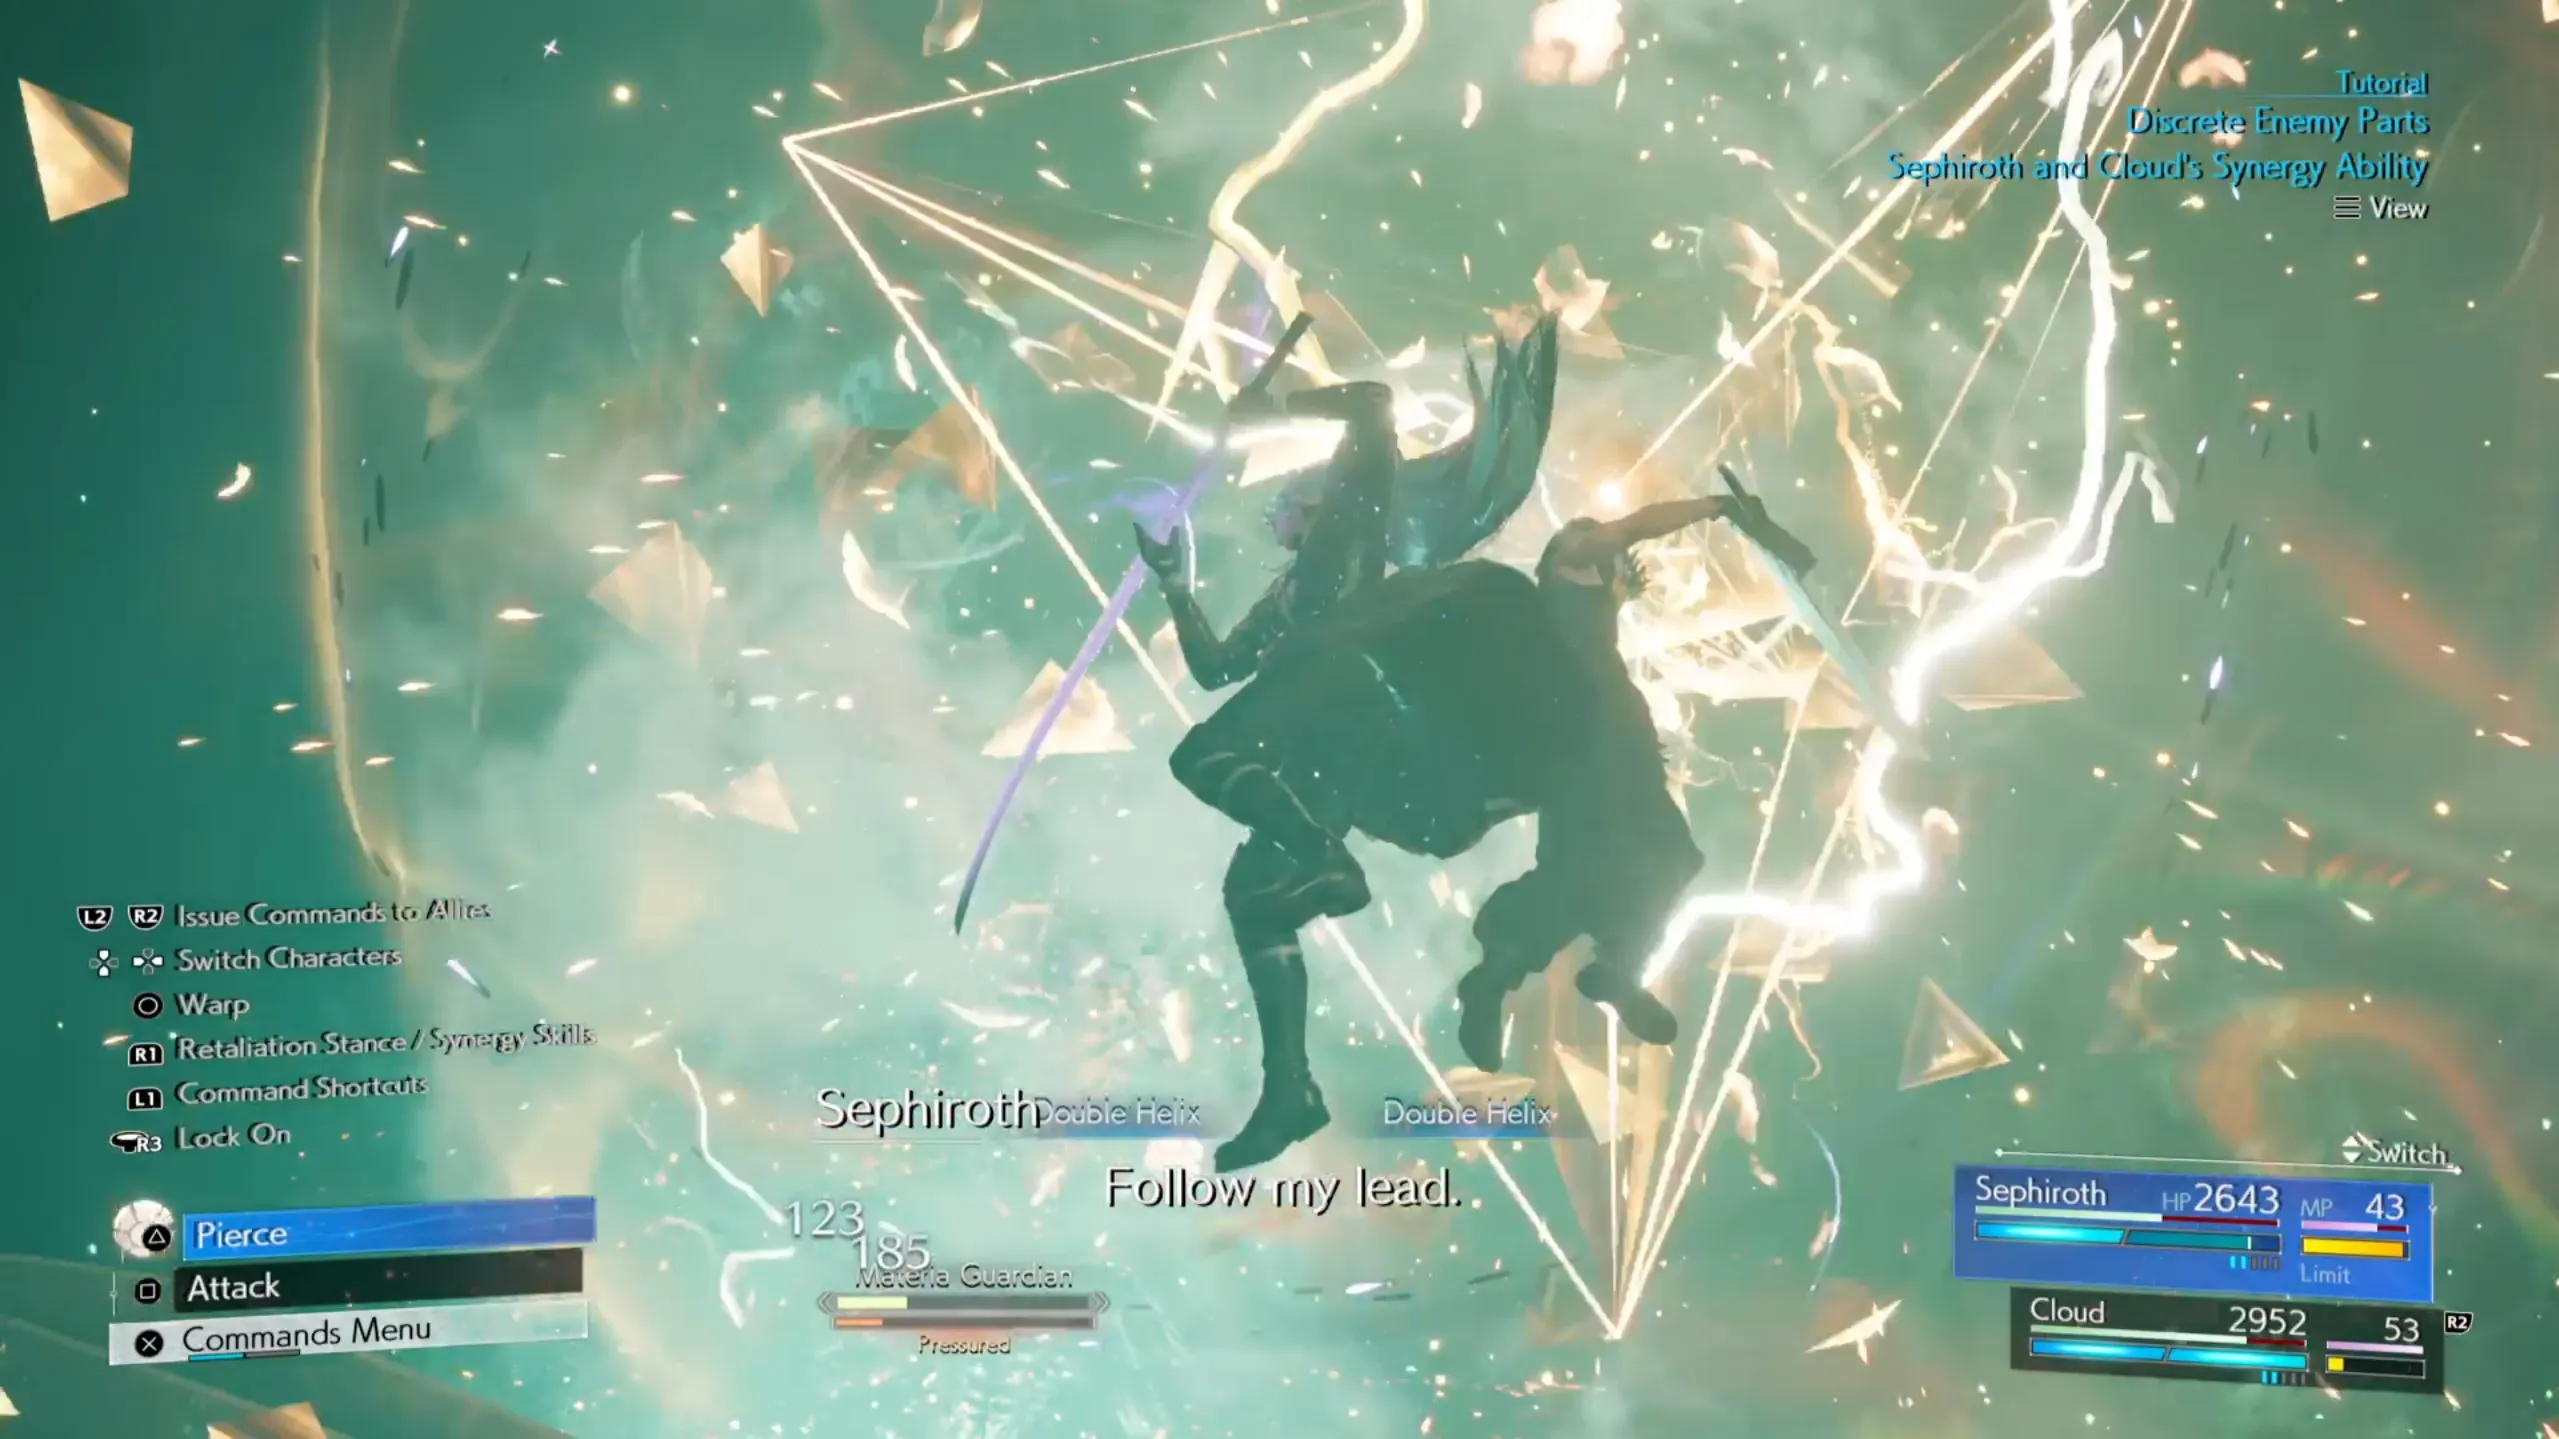 Cloud teaming up with Sephiroth to unleash Double Helix in FF7 Rebirth